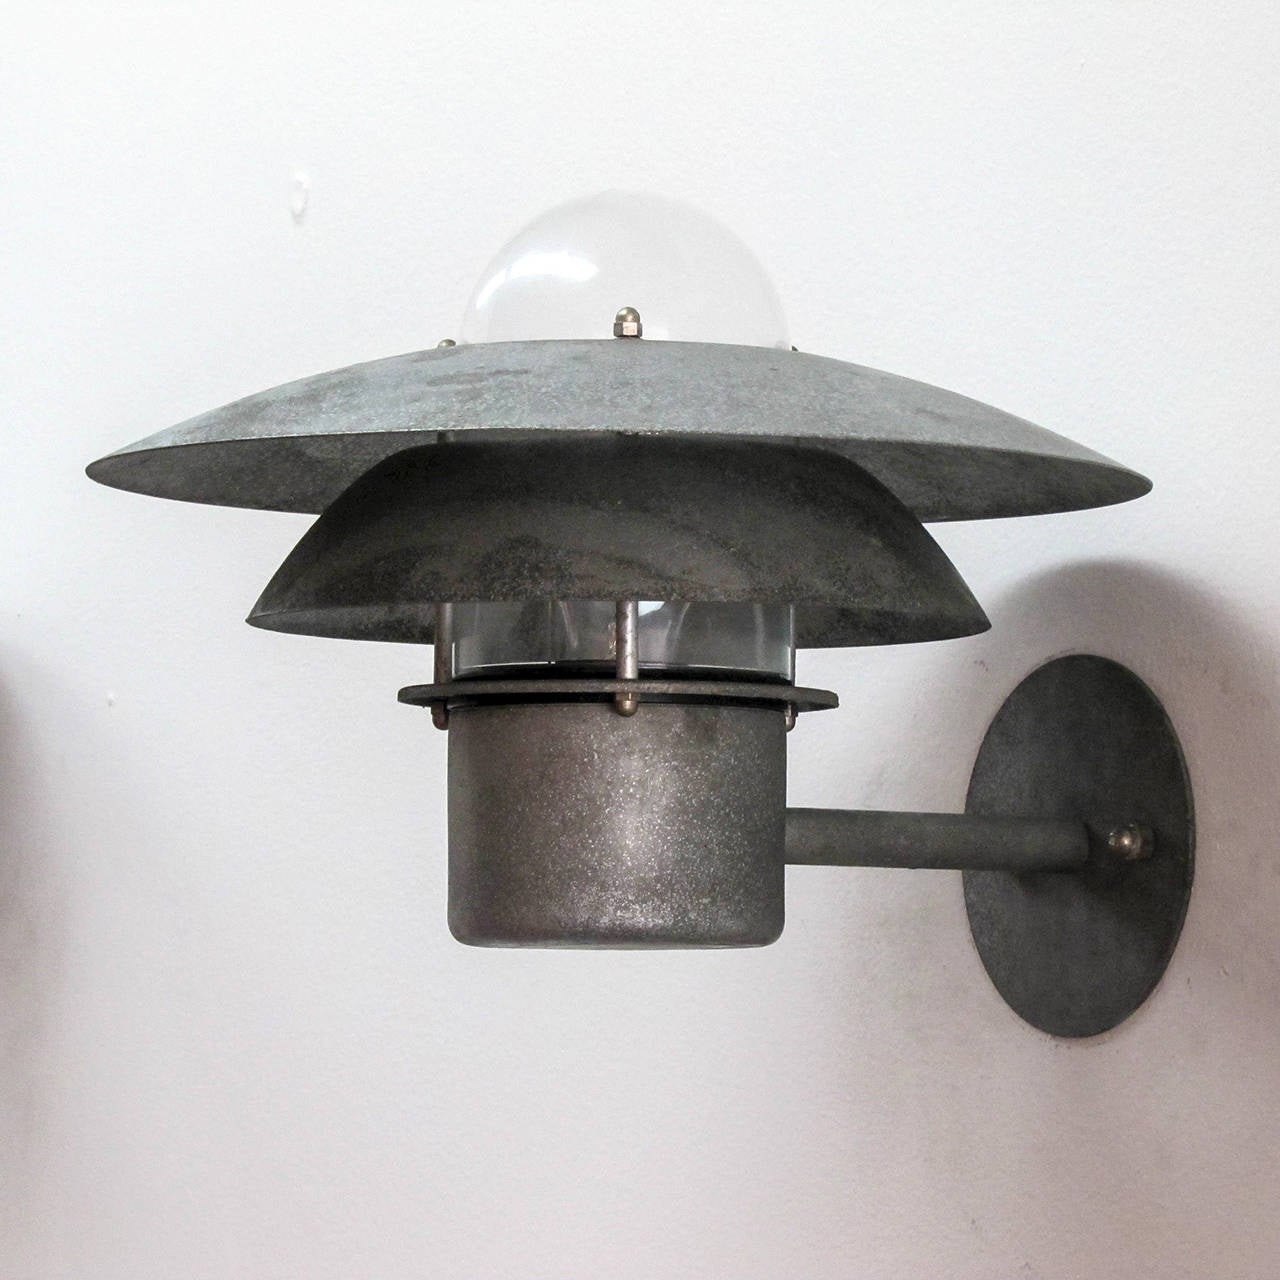 Wonderful Danish outdoor wall light by Danalight in galvanized steel with glass bulb enclosure.